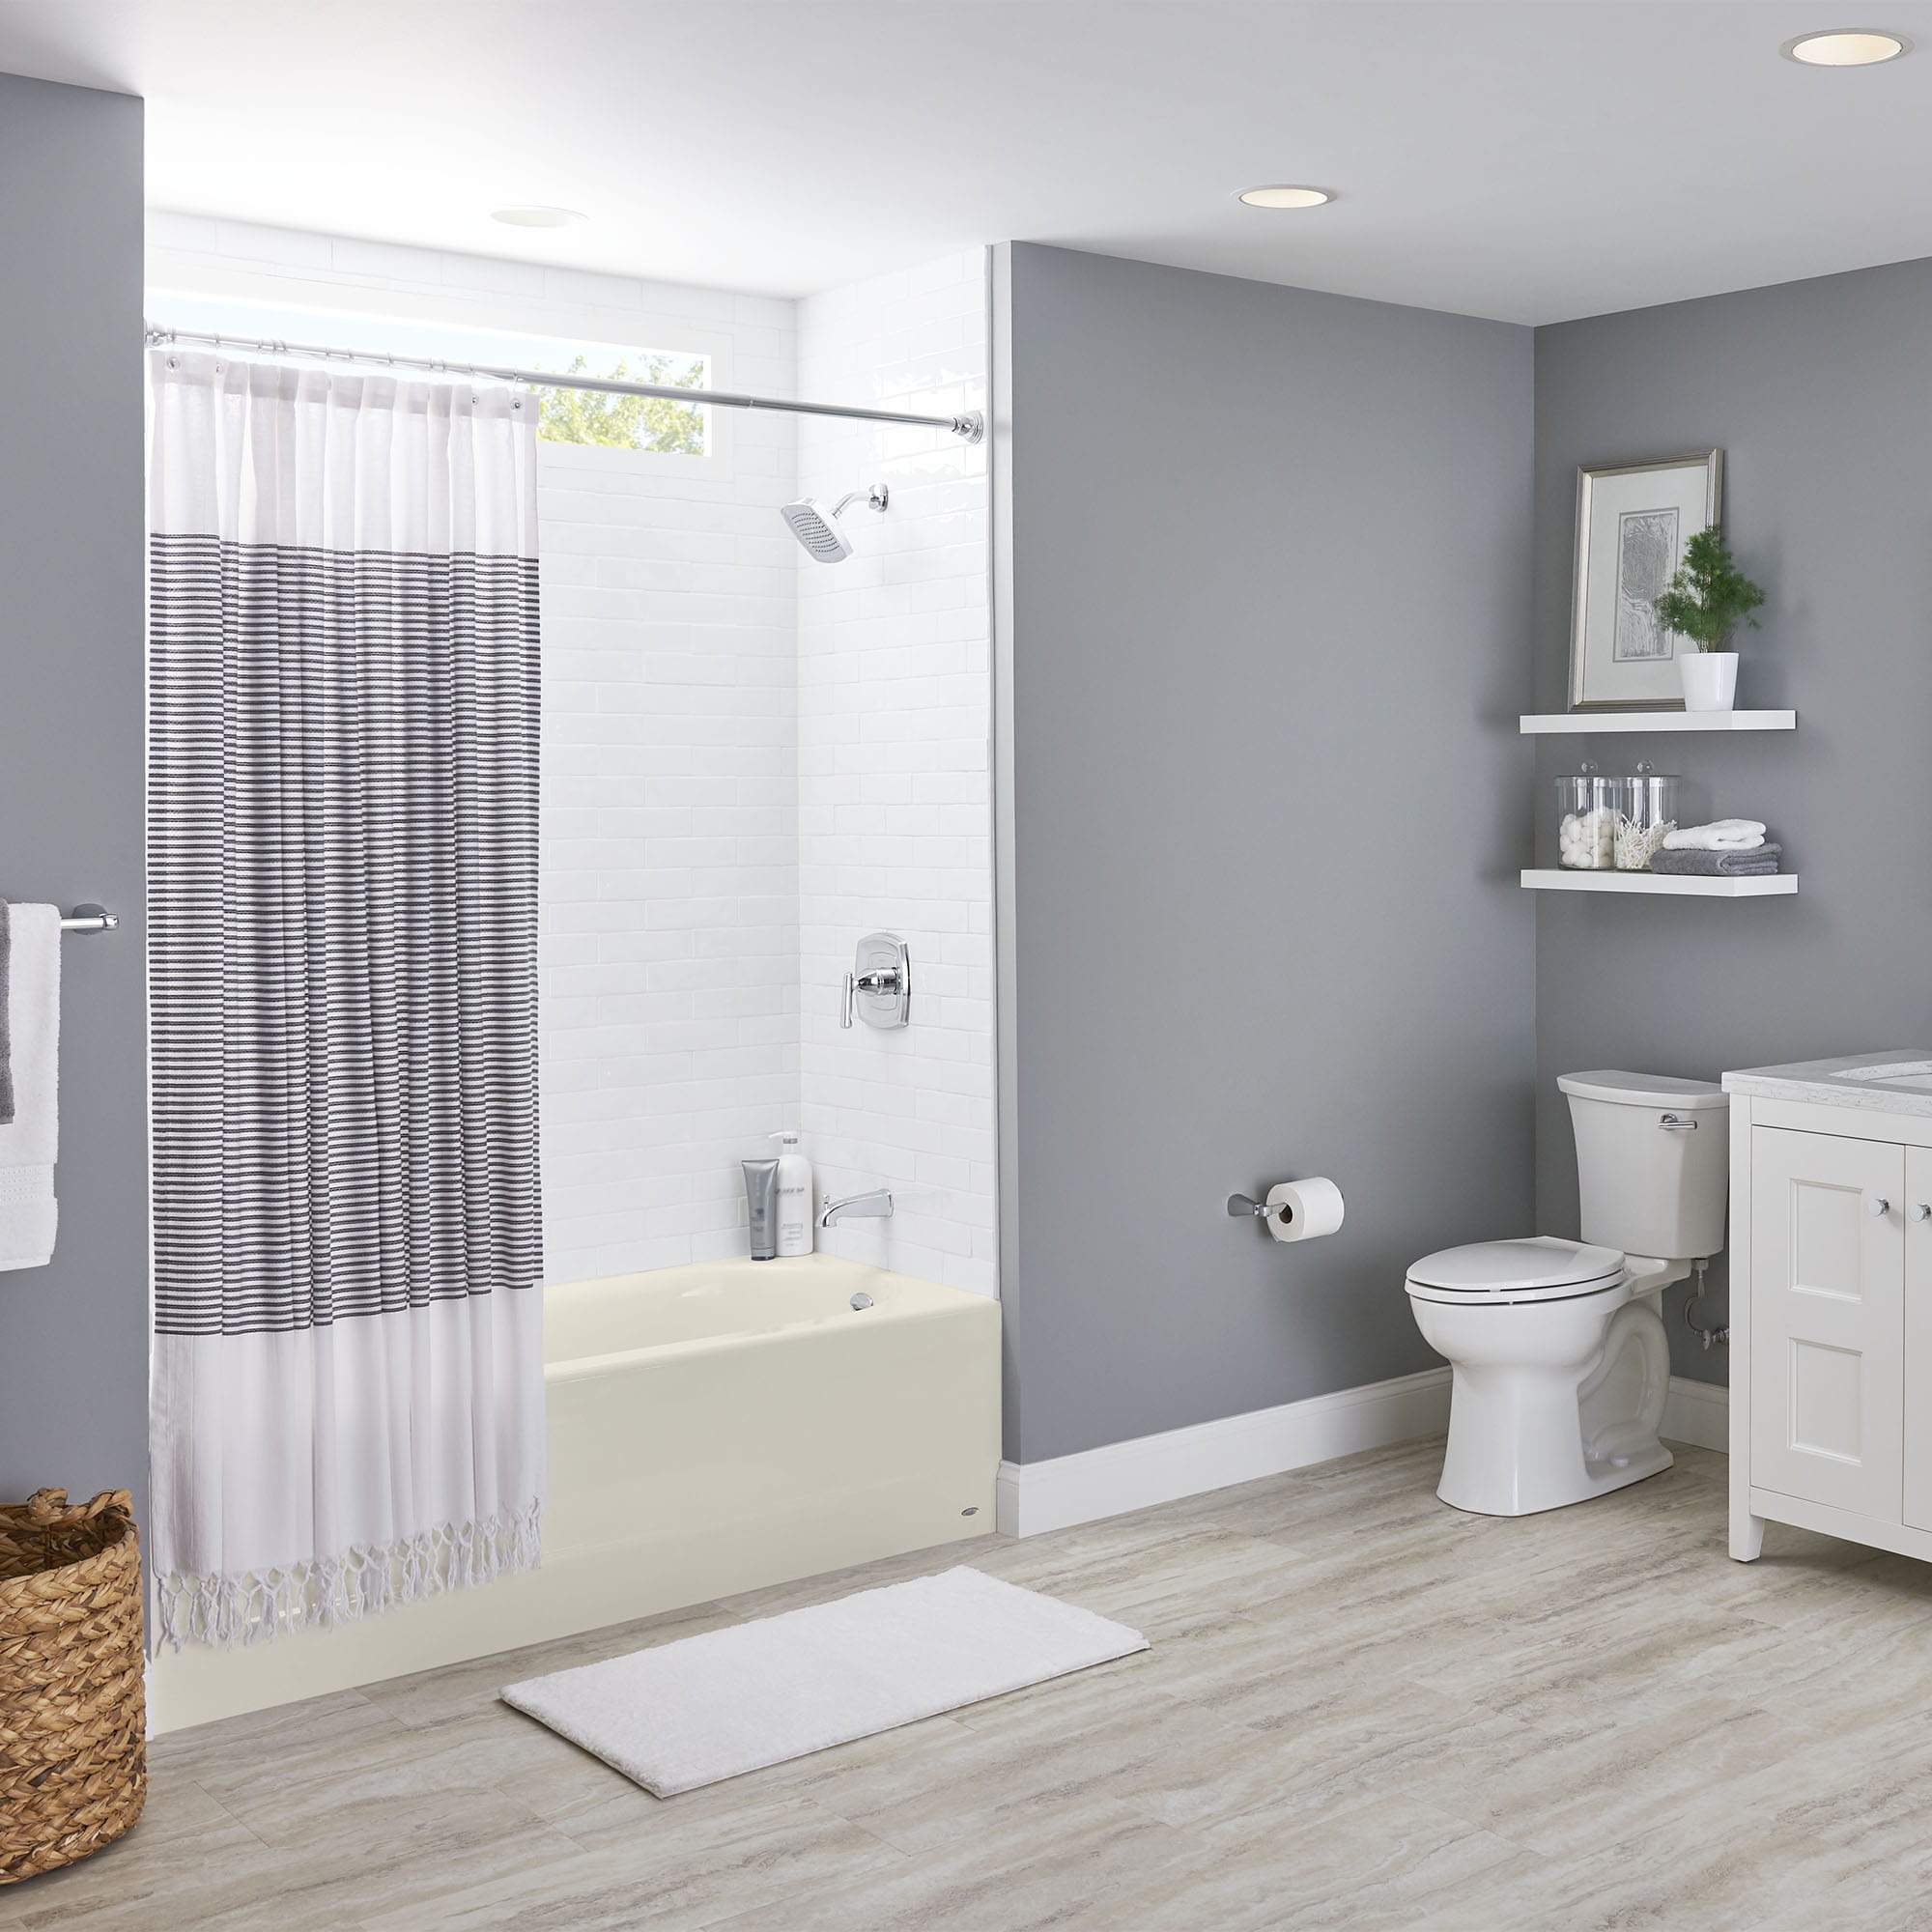 Princeton Americast 60 x 30 Inch Integral Apron Bathtub Above Floor Rough with Right Hand Outlet LINEN